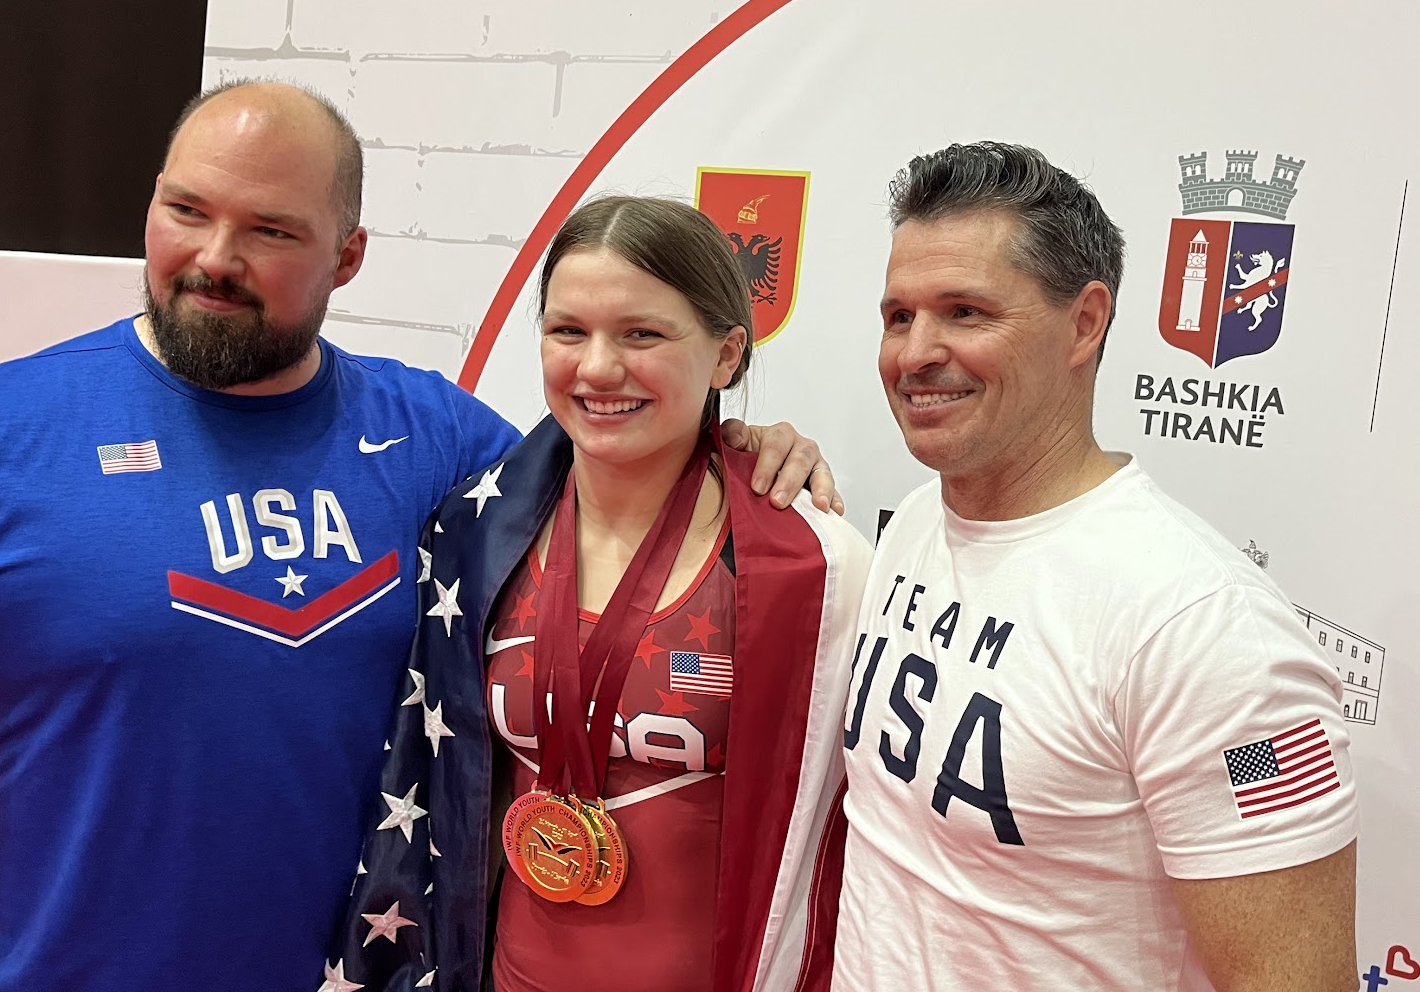 Record-breaking win for US CrossFitter Nicholson after taking "a weightlifting track"